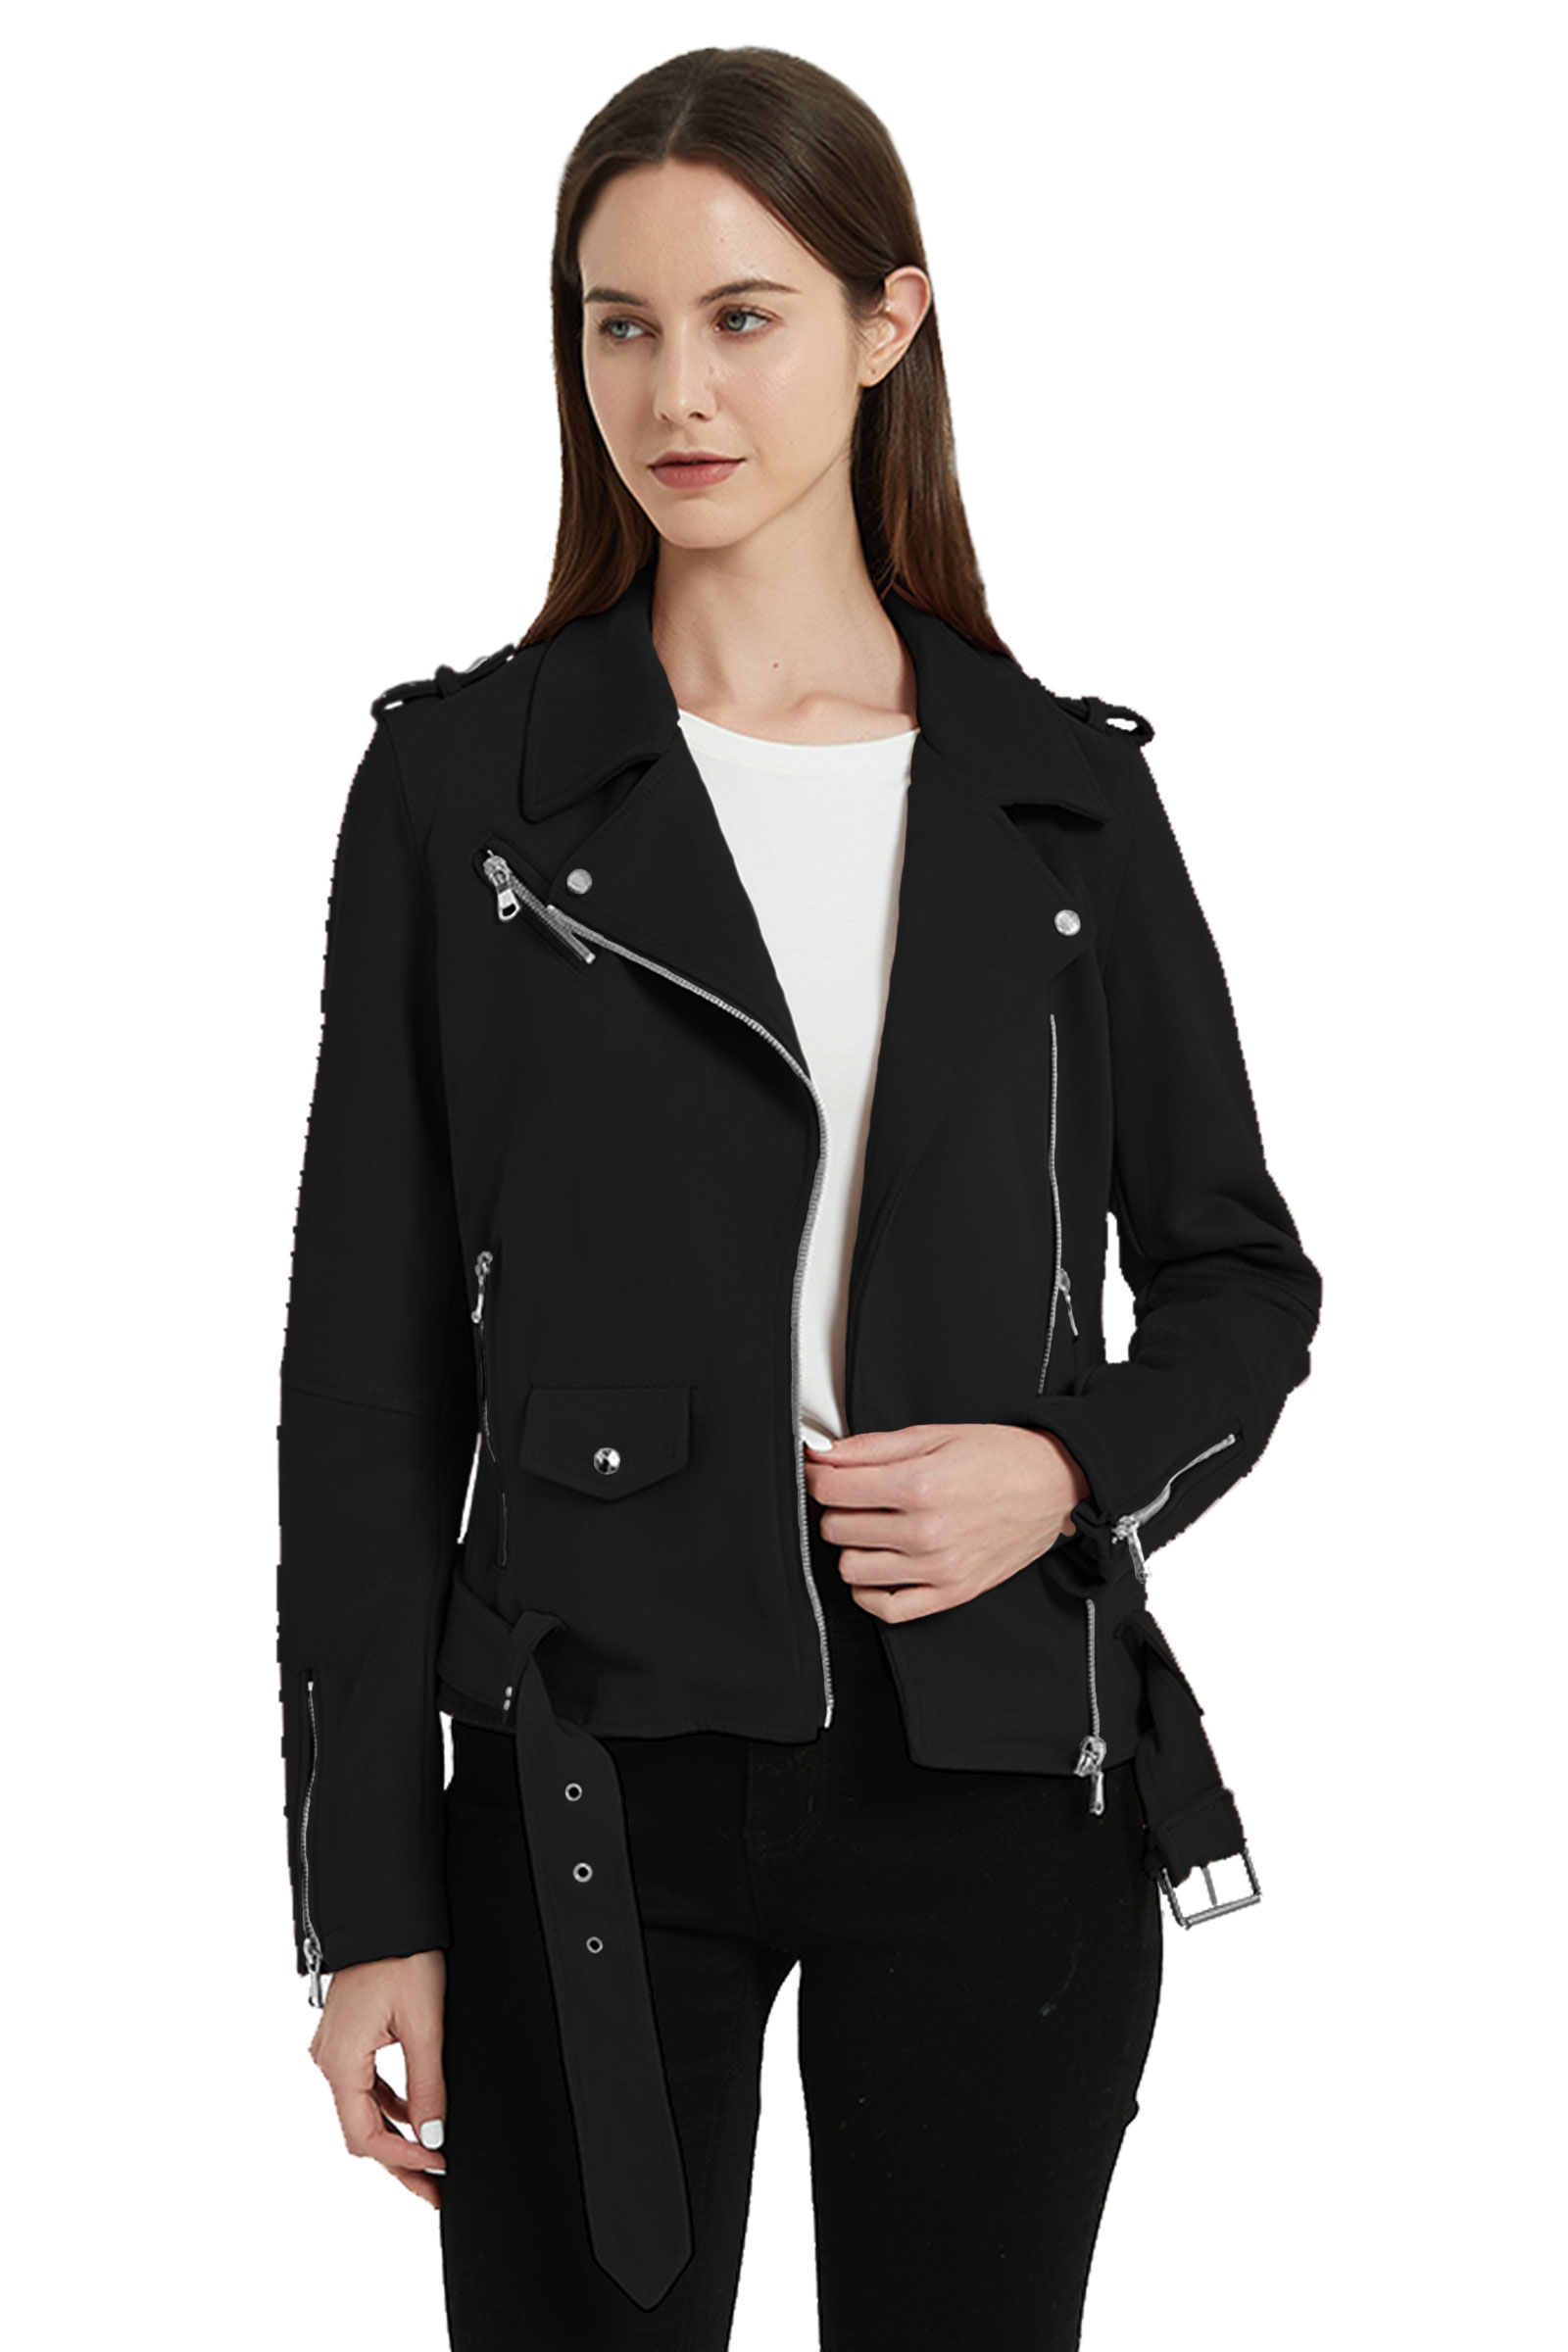 Giolshon Women's Faux Suede Leather Jacket, Motorcycle Short PU Coat Moto Biker Fitted Slim Outwear with Belt - image 7 of 8